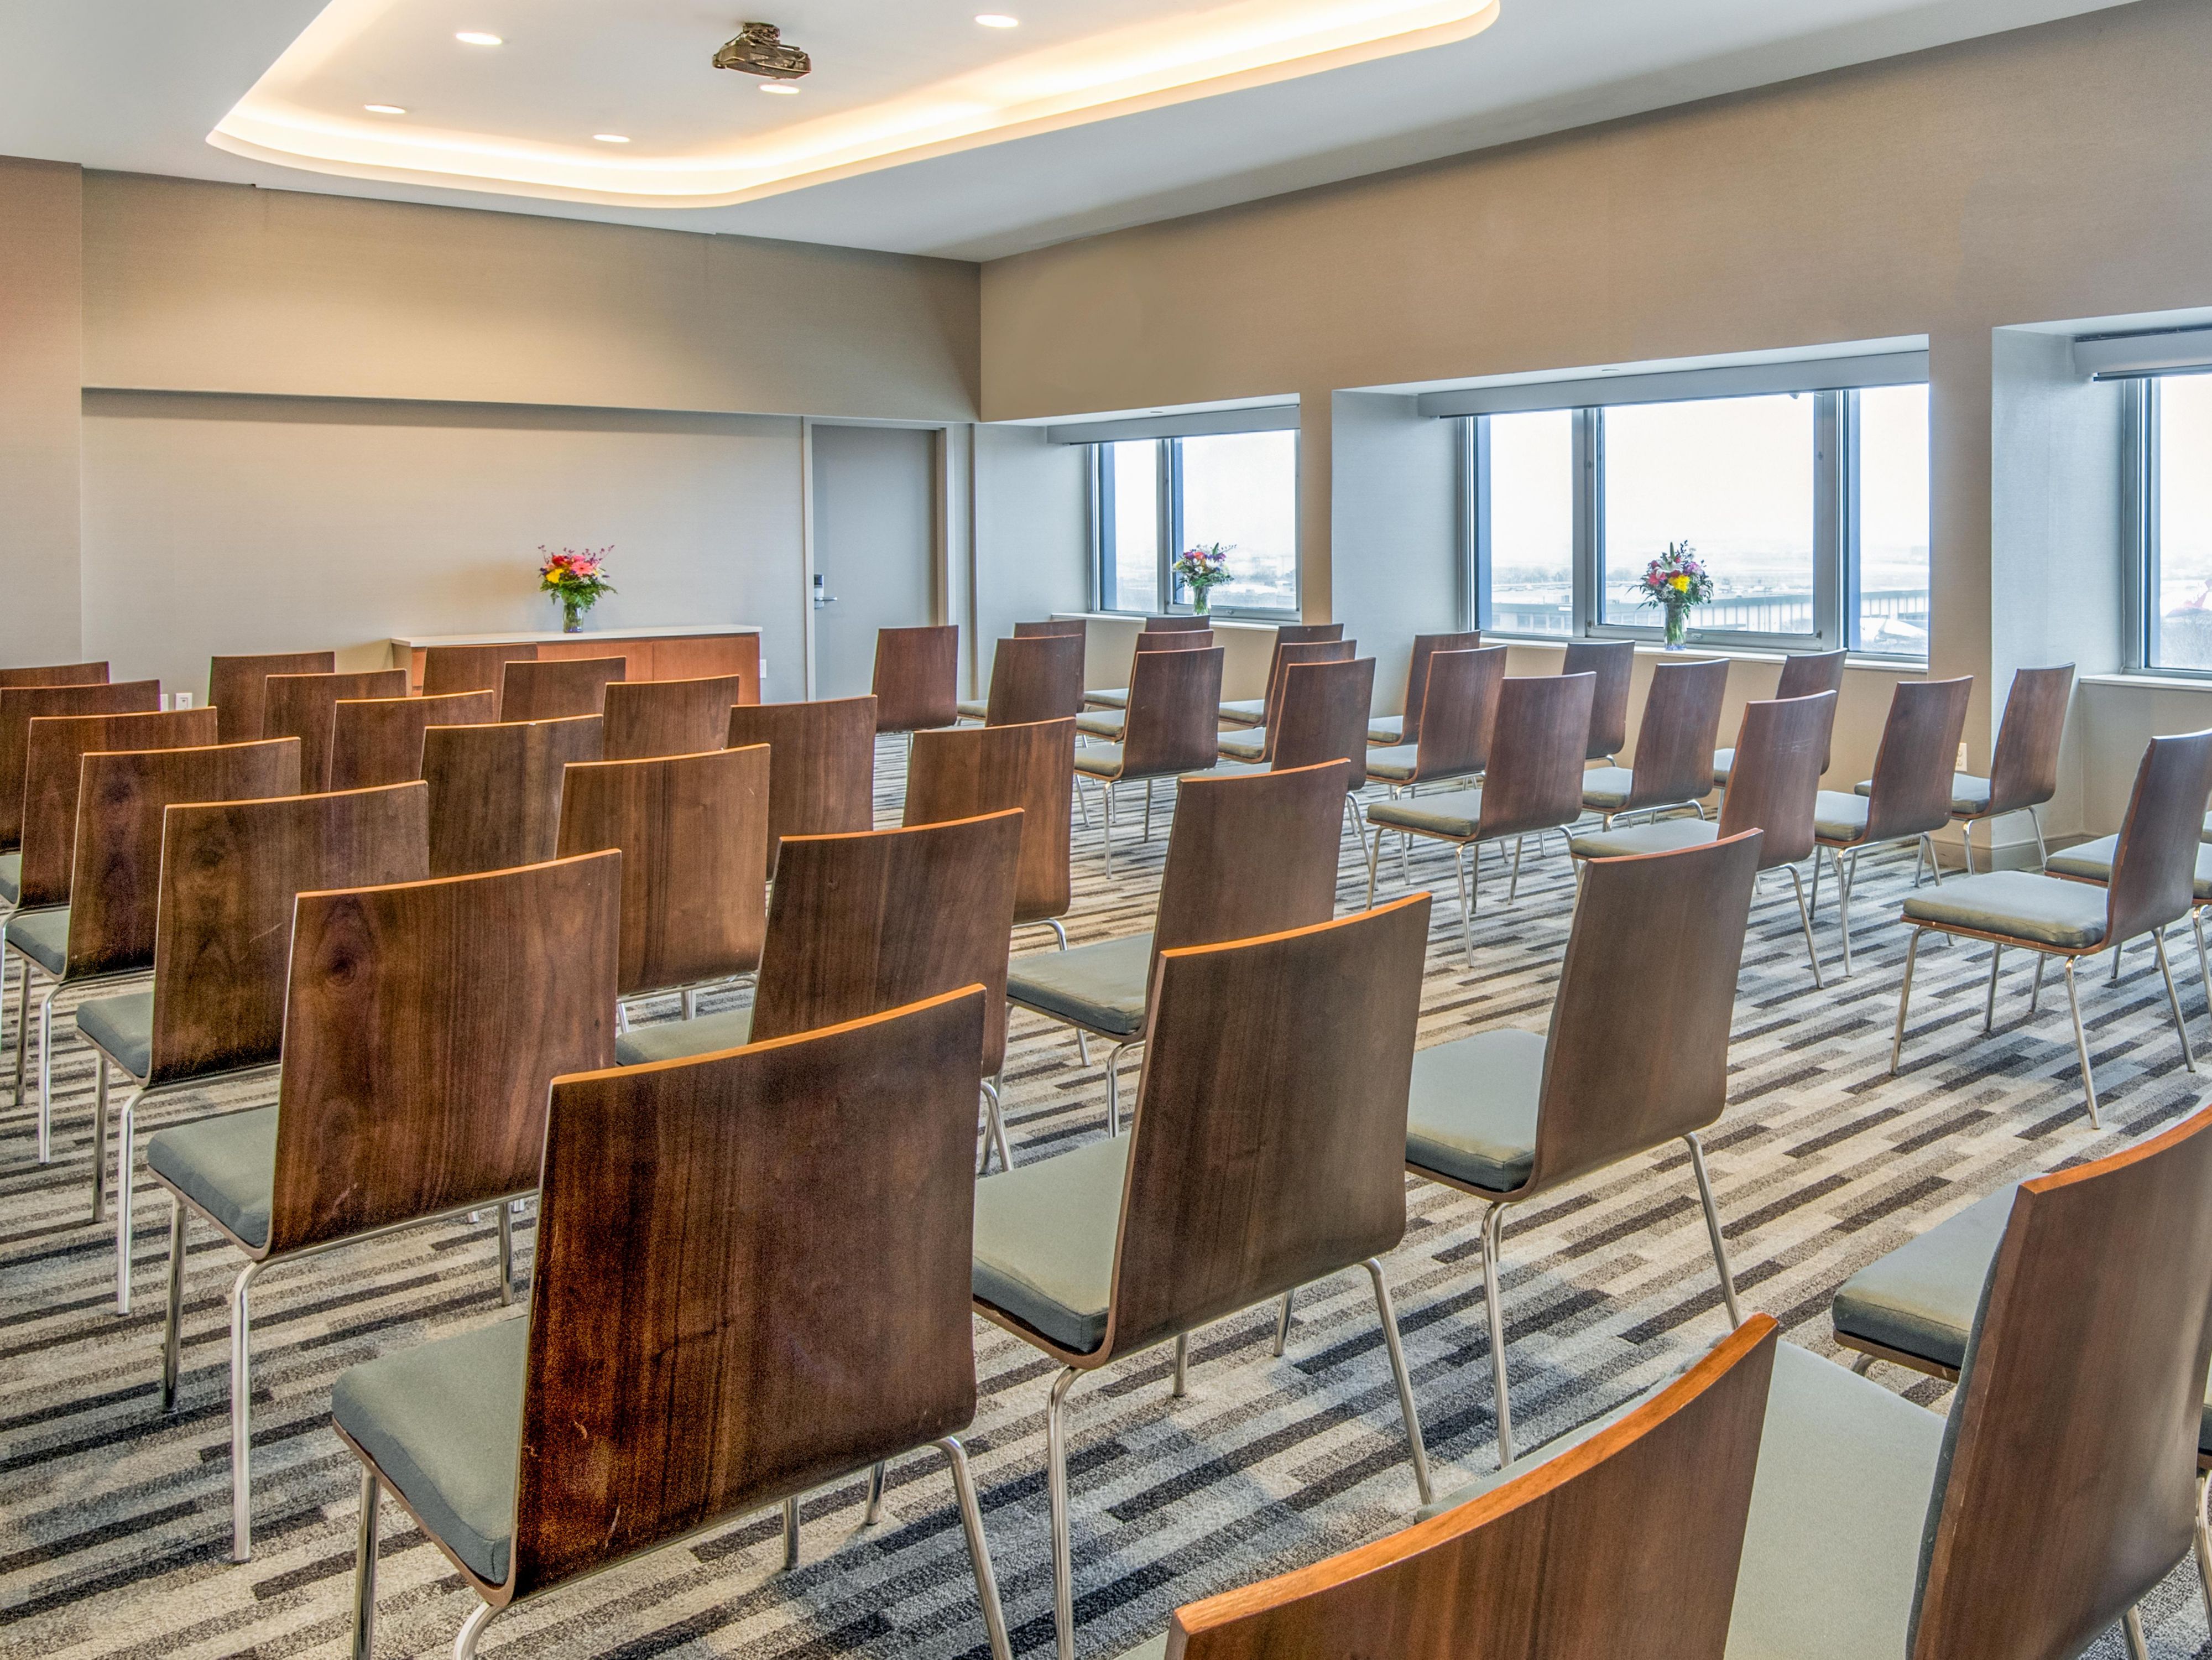 From state-of-the-art technology to fine furnishings, our event space is the ideal setting for your upcoming business meeting or seminar. With over 4,500 square feet of customizable space featuring nine conference rooms, our in-house events coordinator will work with you to plan your event down to the very last detail. 